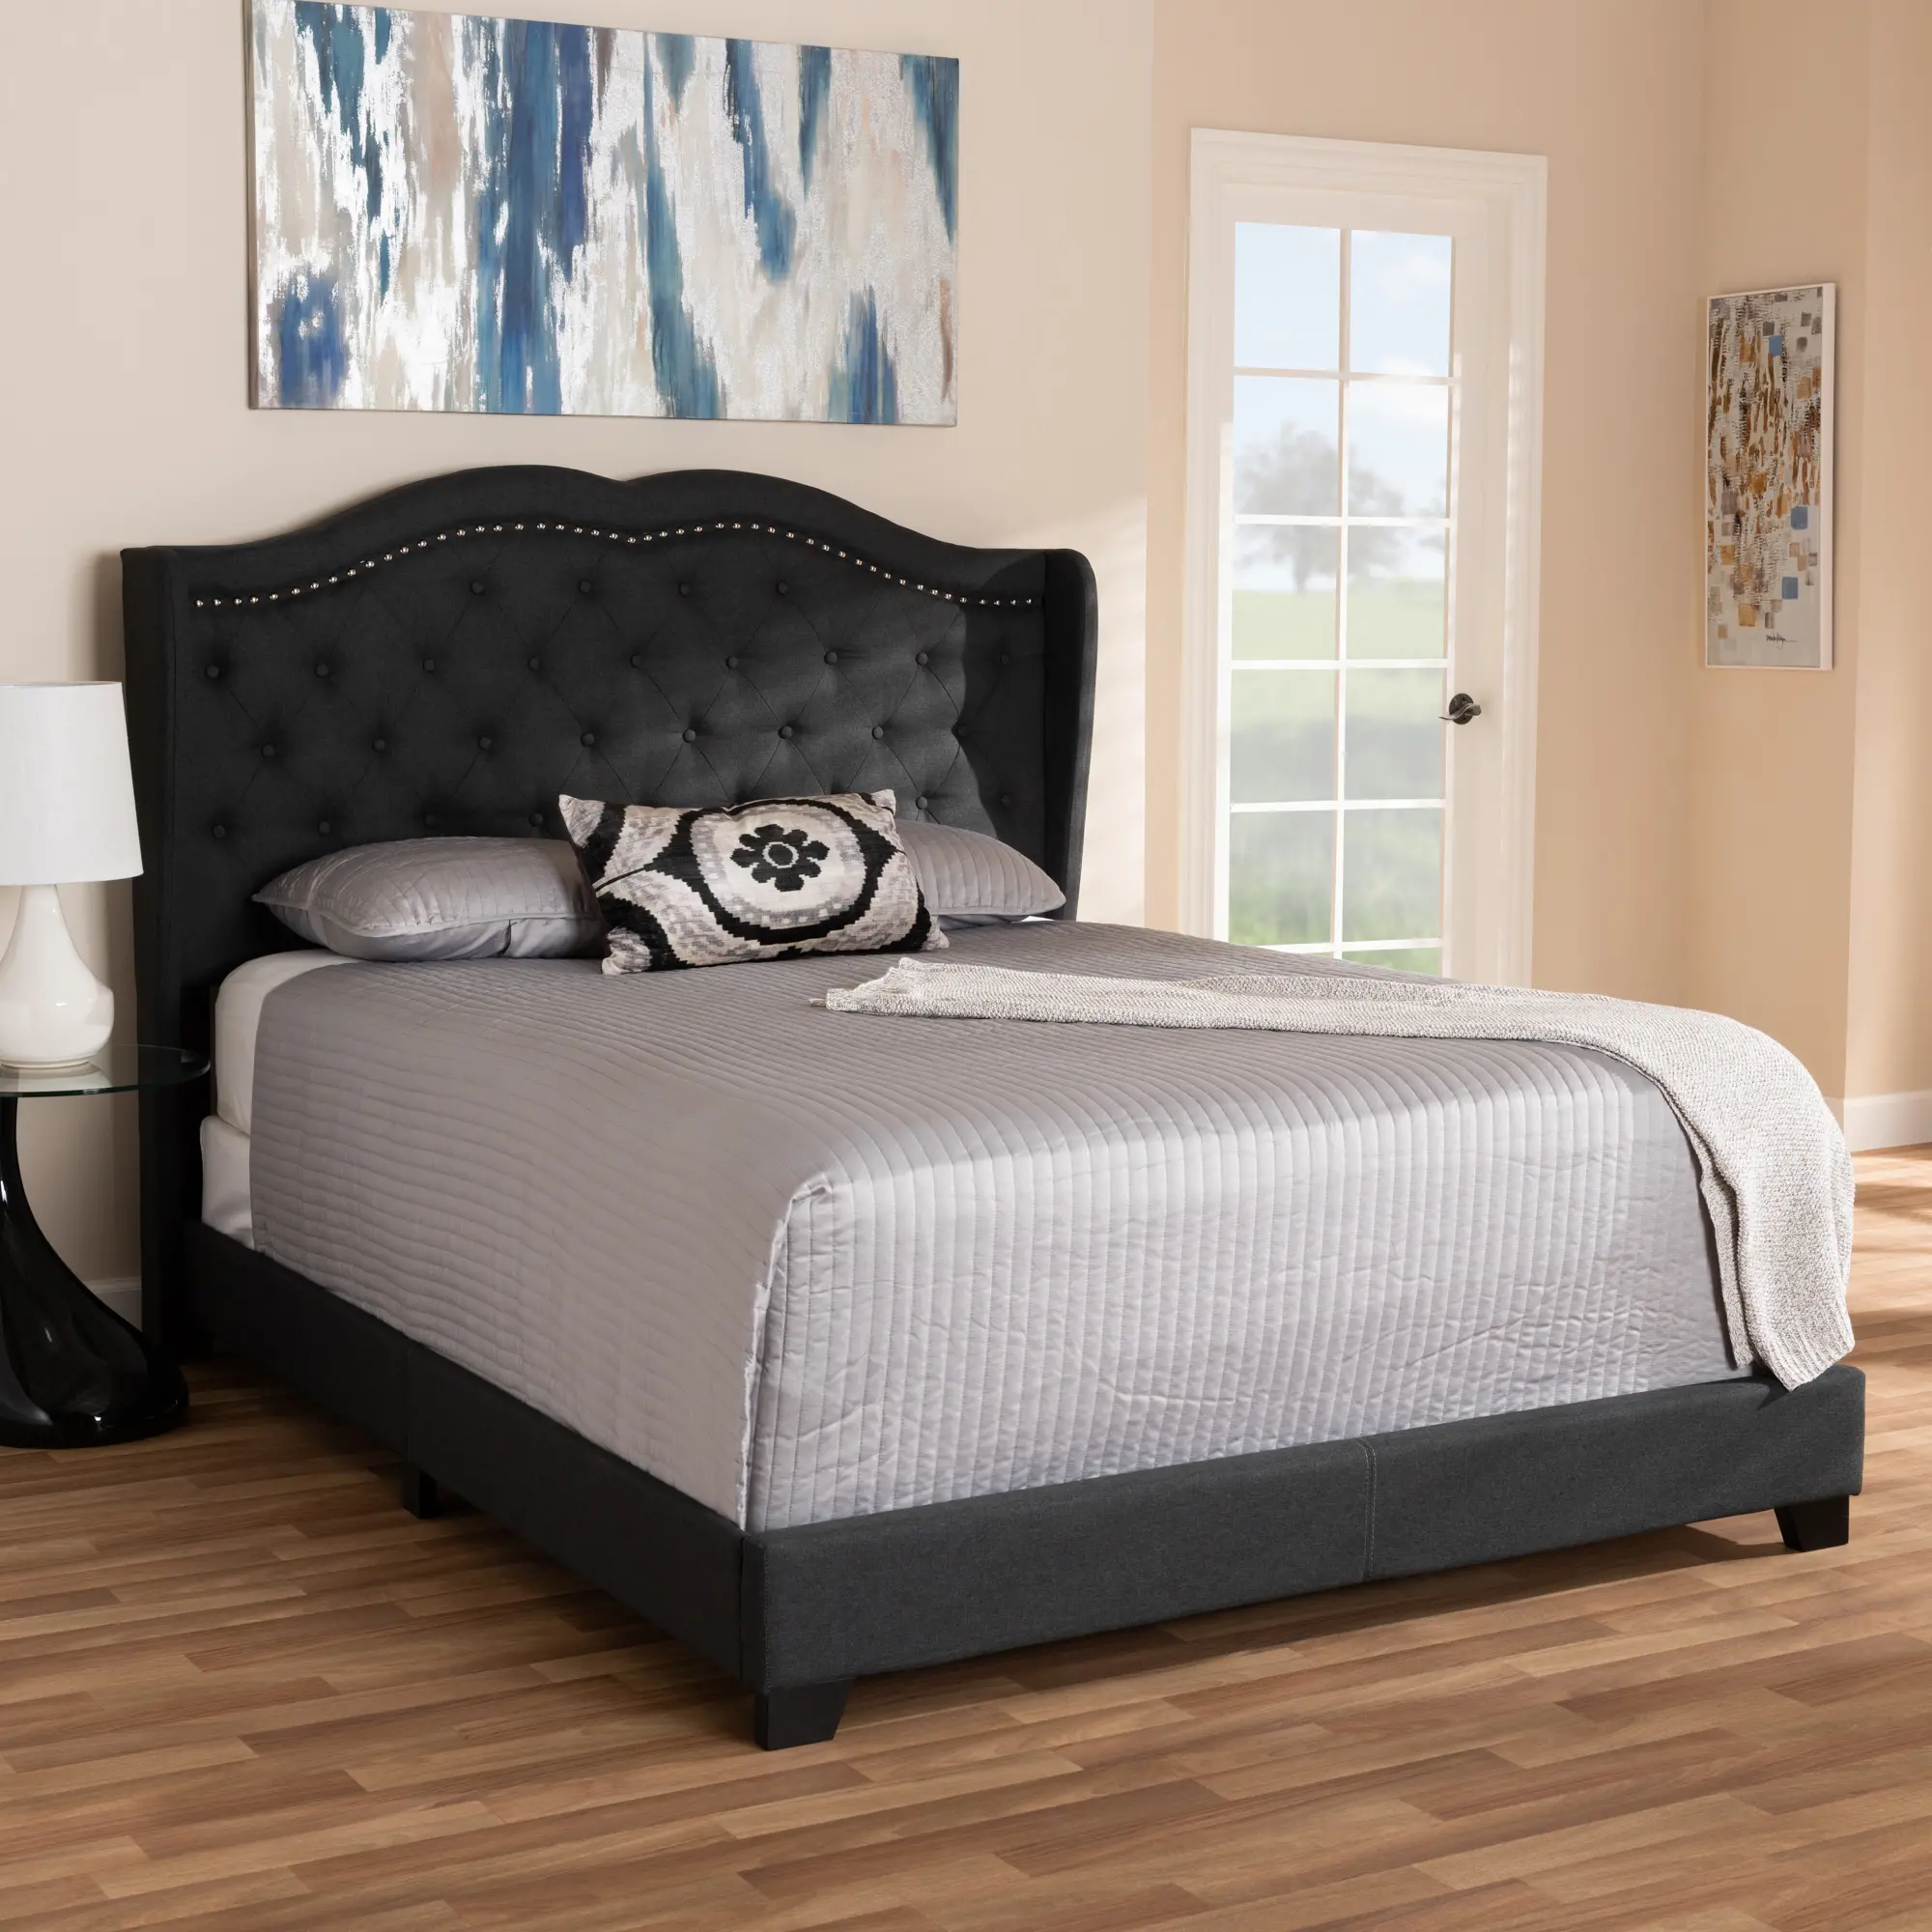 149-8926-RCW Contemporary Charcoal Gray Upholstered Full Bed -  sku 149-8926-RCW